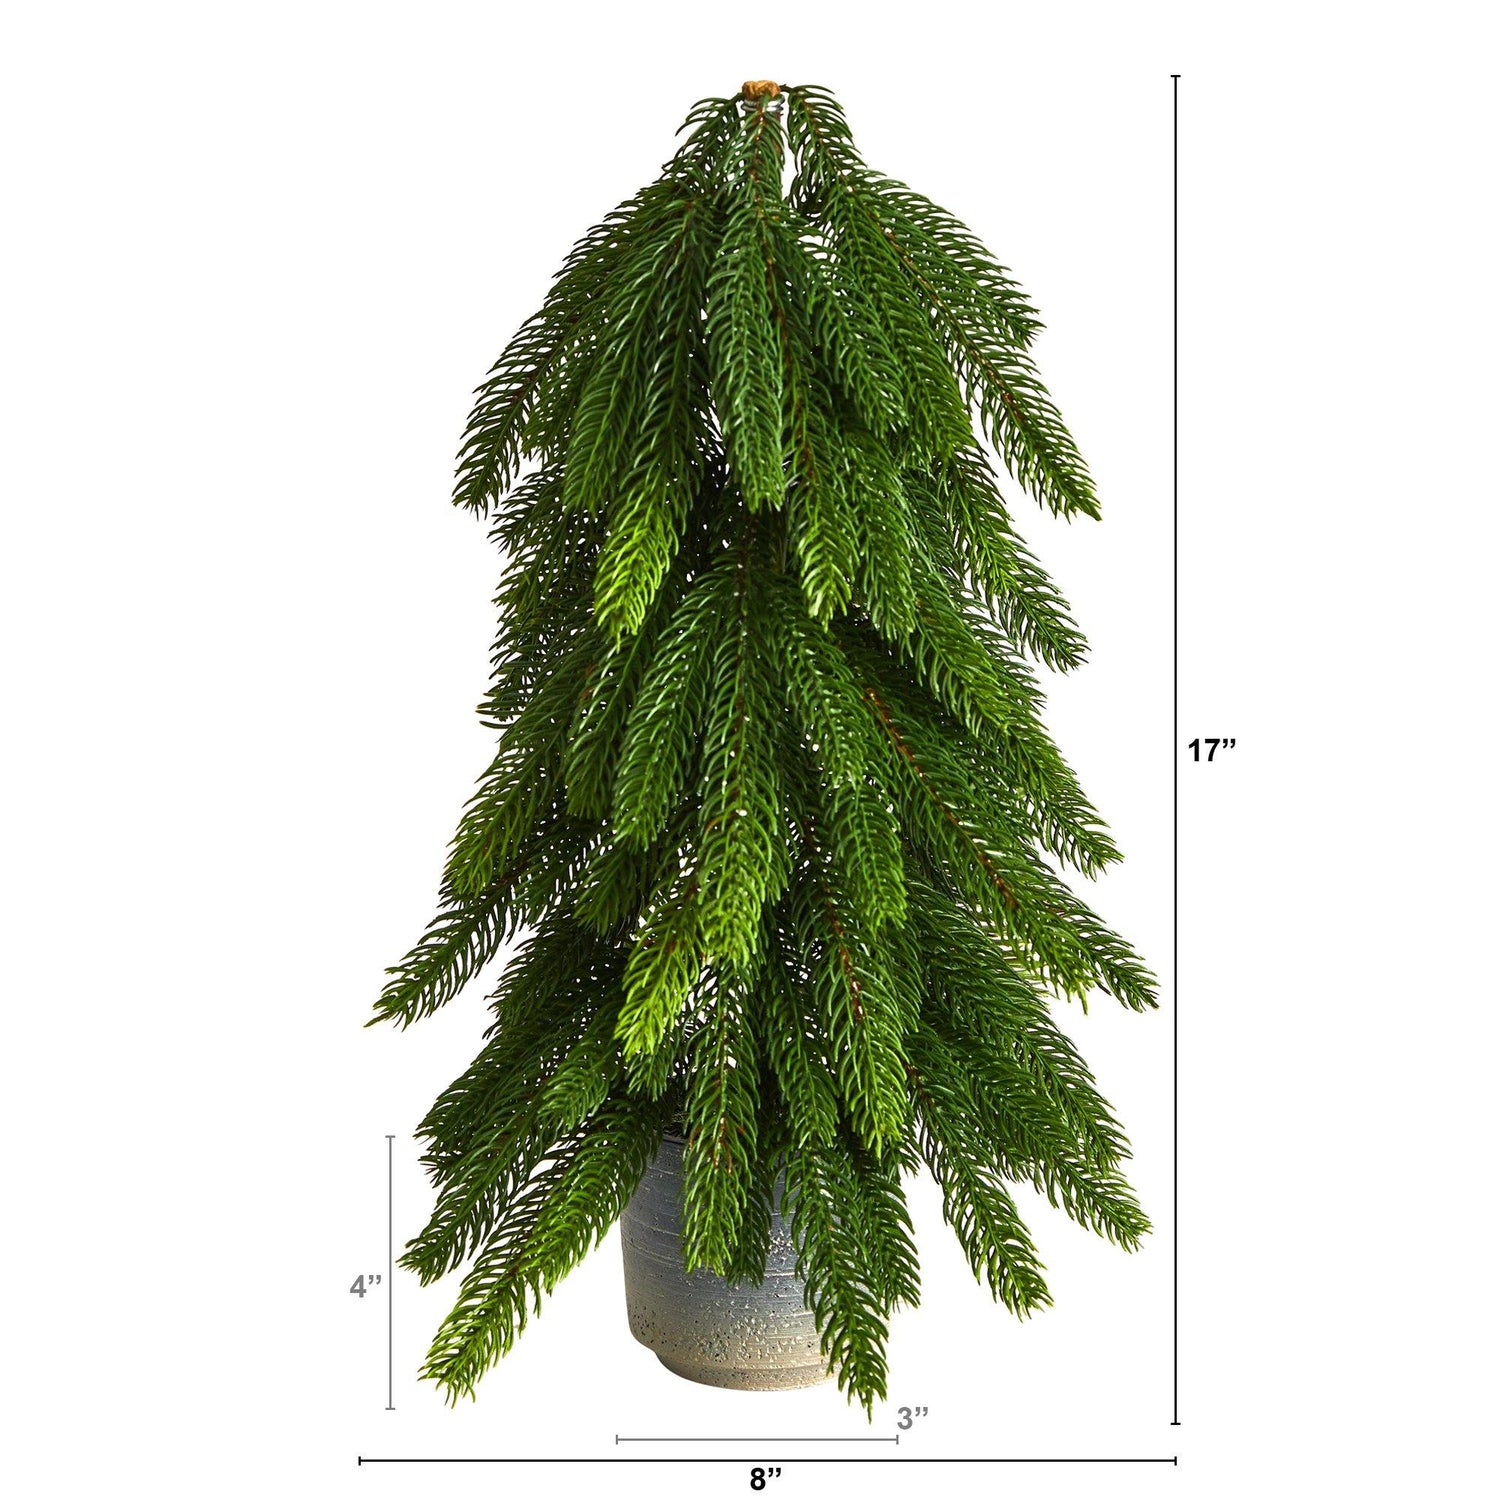 17” Pine Artificial Christmas Tree in Decorative Planter